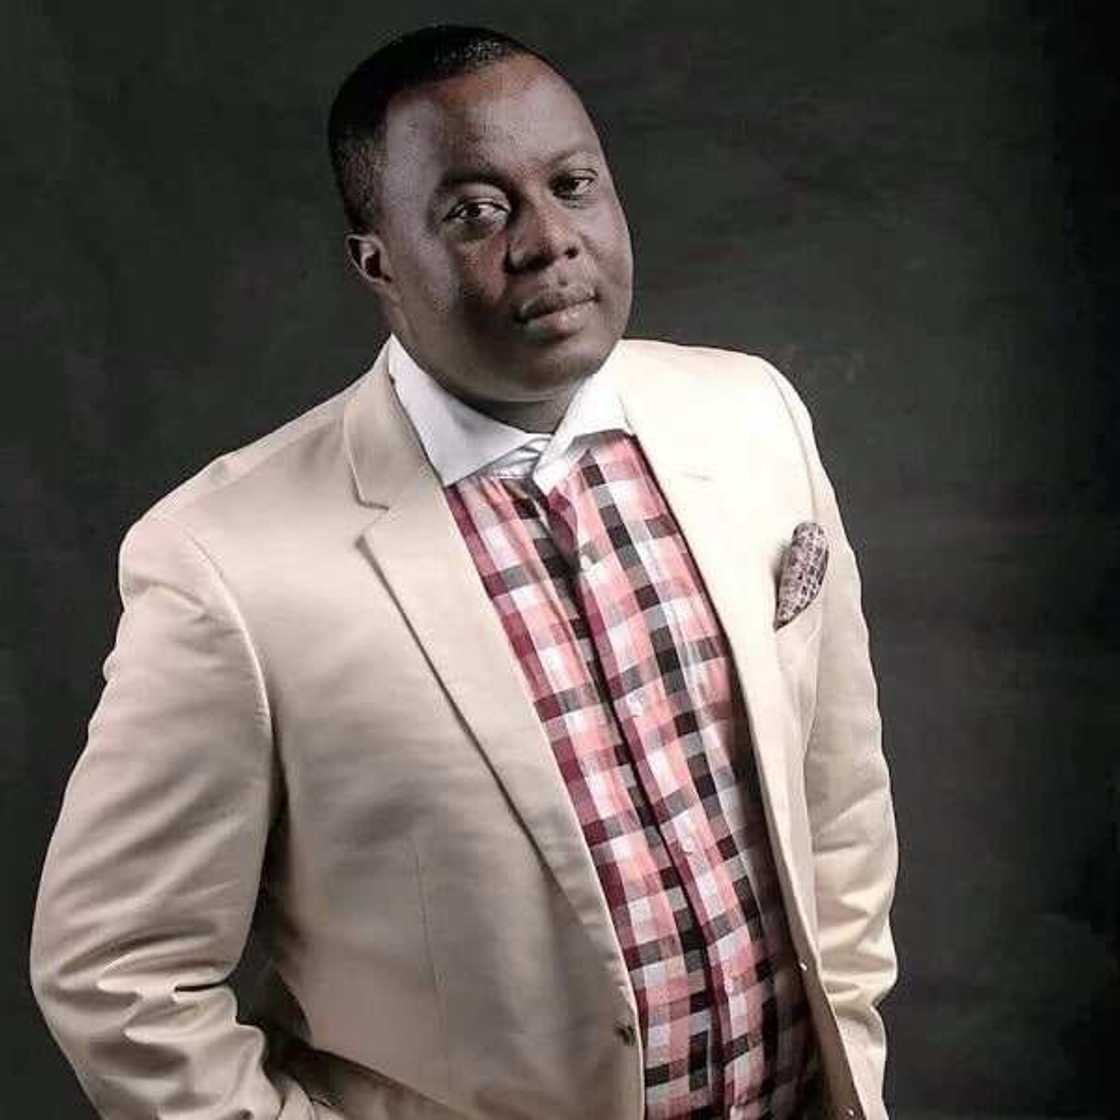 Top male Ghanaian gospel musicians who are missing in action